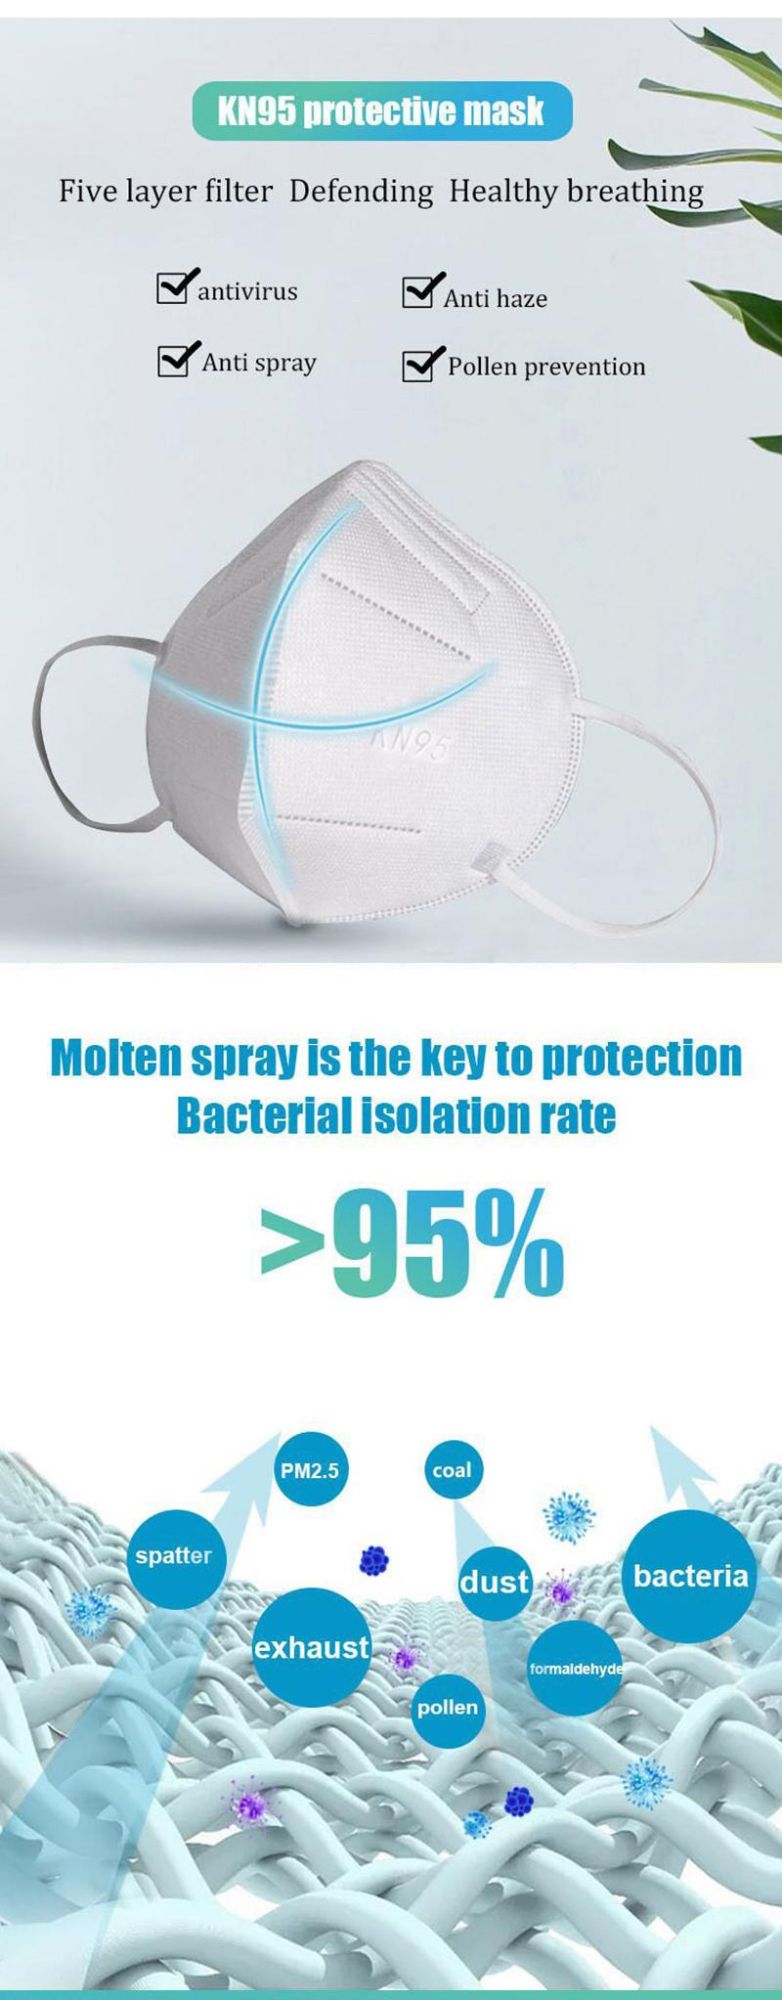 Wholesale 5 Layers Anti Dust Virus Disposable Protective Respirator KN95 Face FFP2 Mask Dust Protective Face Cover